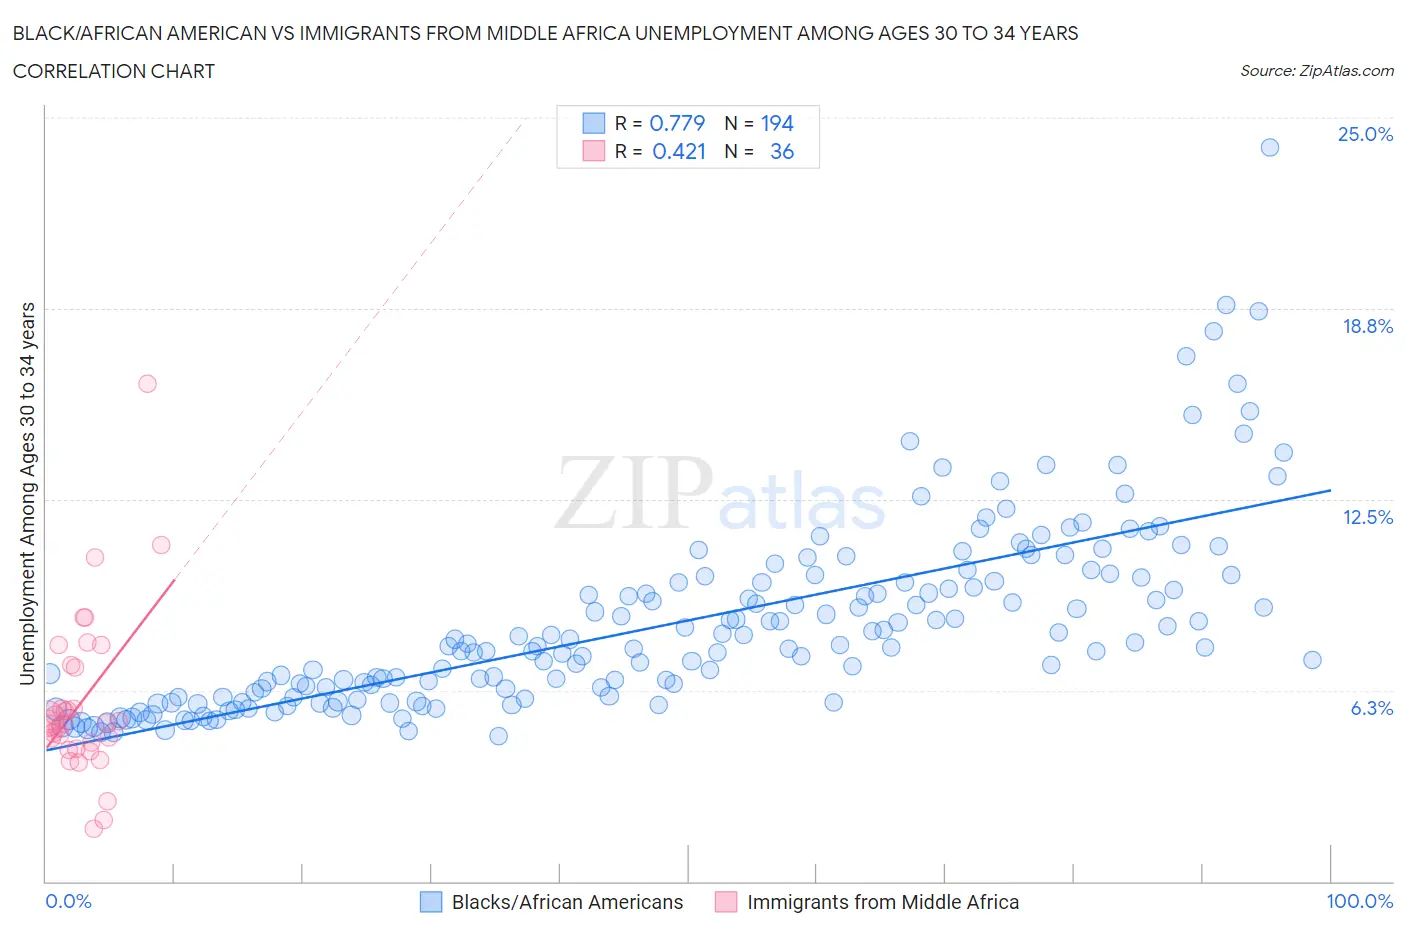 Black/African American vs Immigrants from Middle Africa Unemployment Among Ages 30 to 34 years